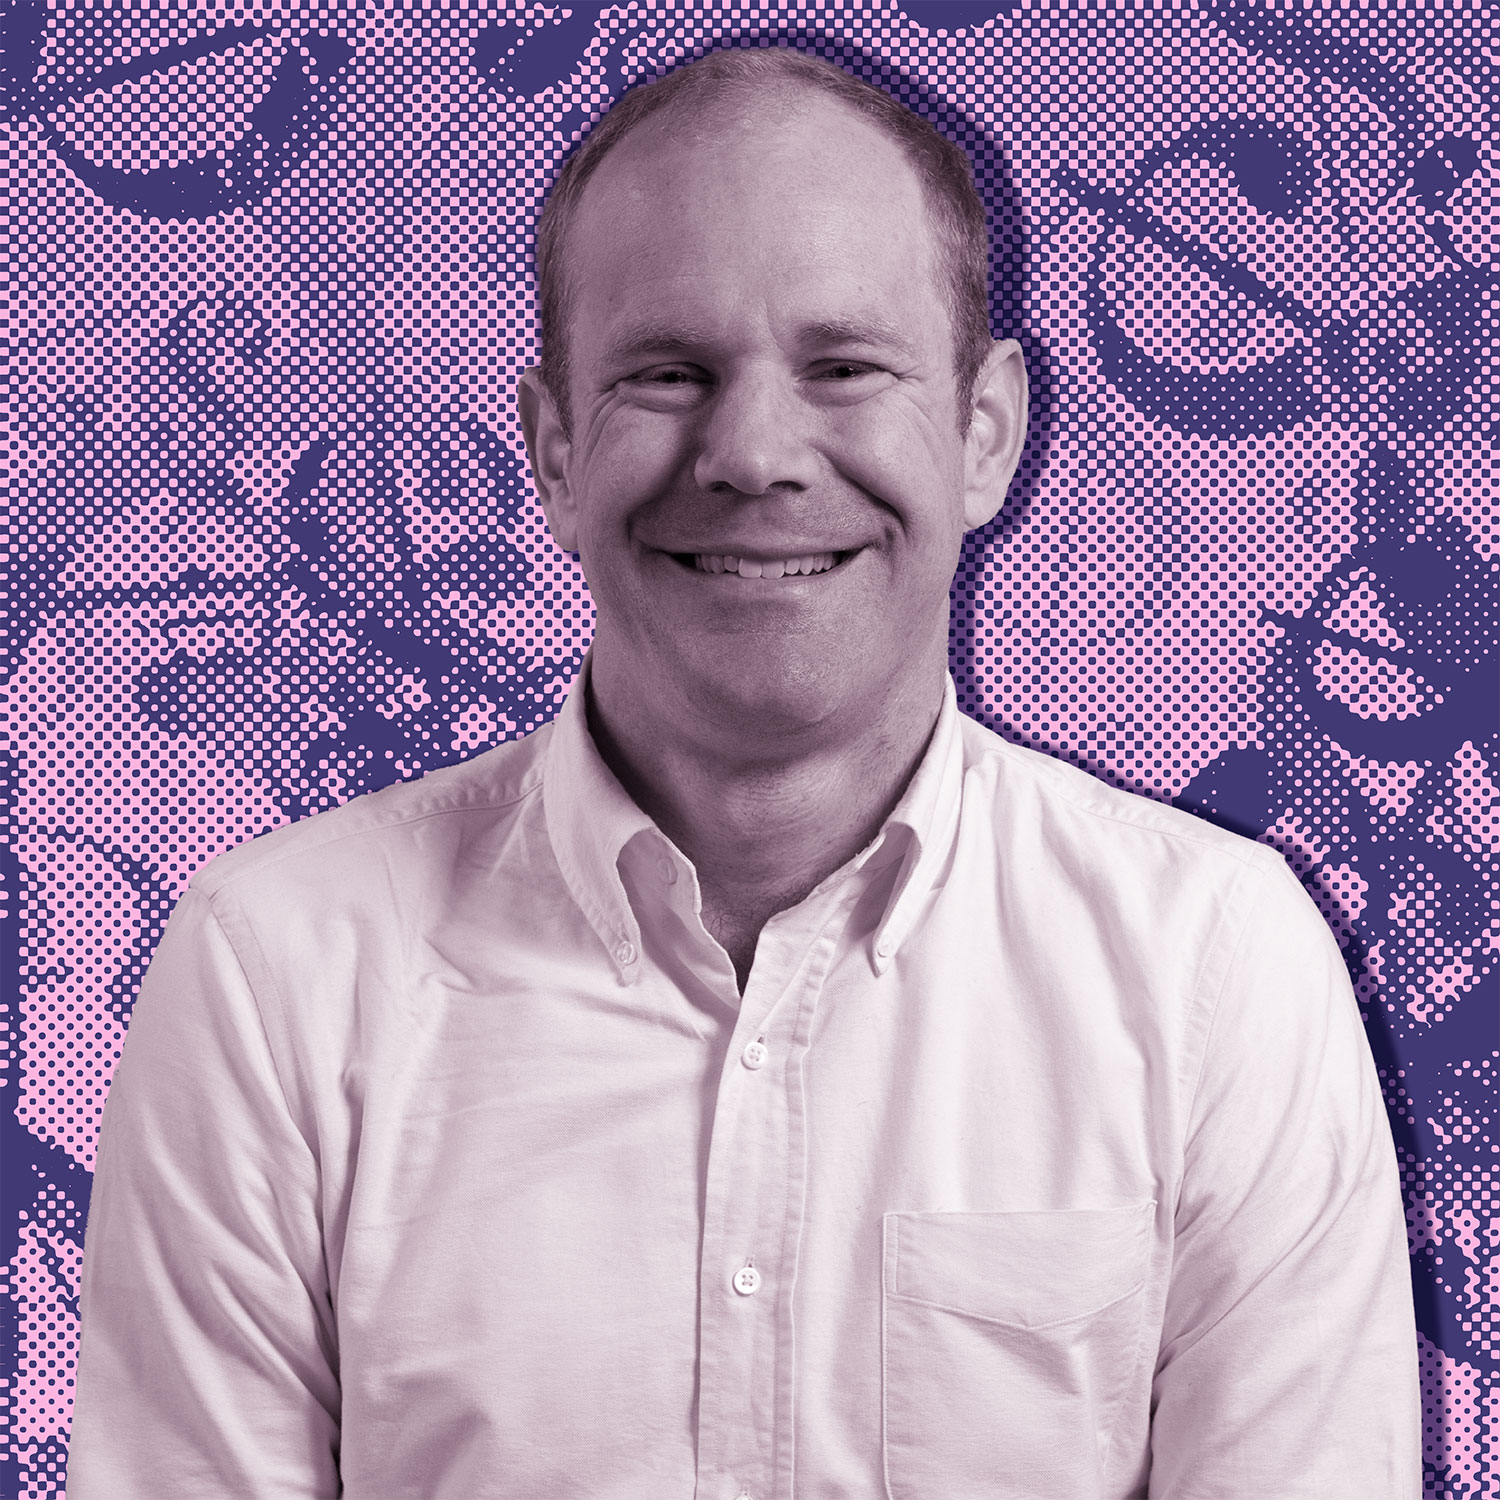 A portrait of Ben Reeves, the Chief Investment Officer for Wealthsimple, on a purple background with money signs.